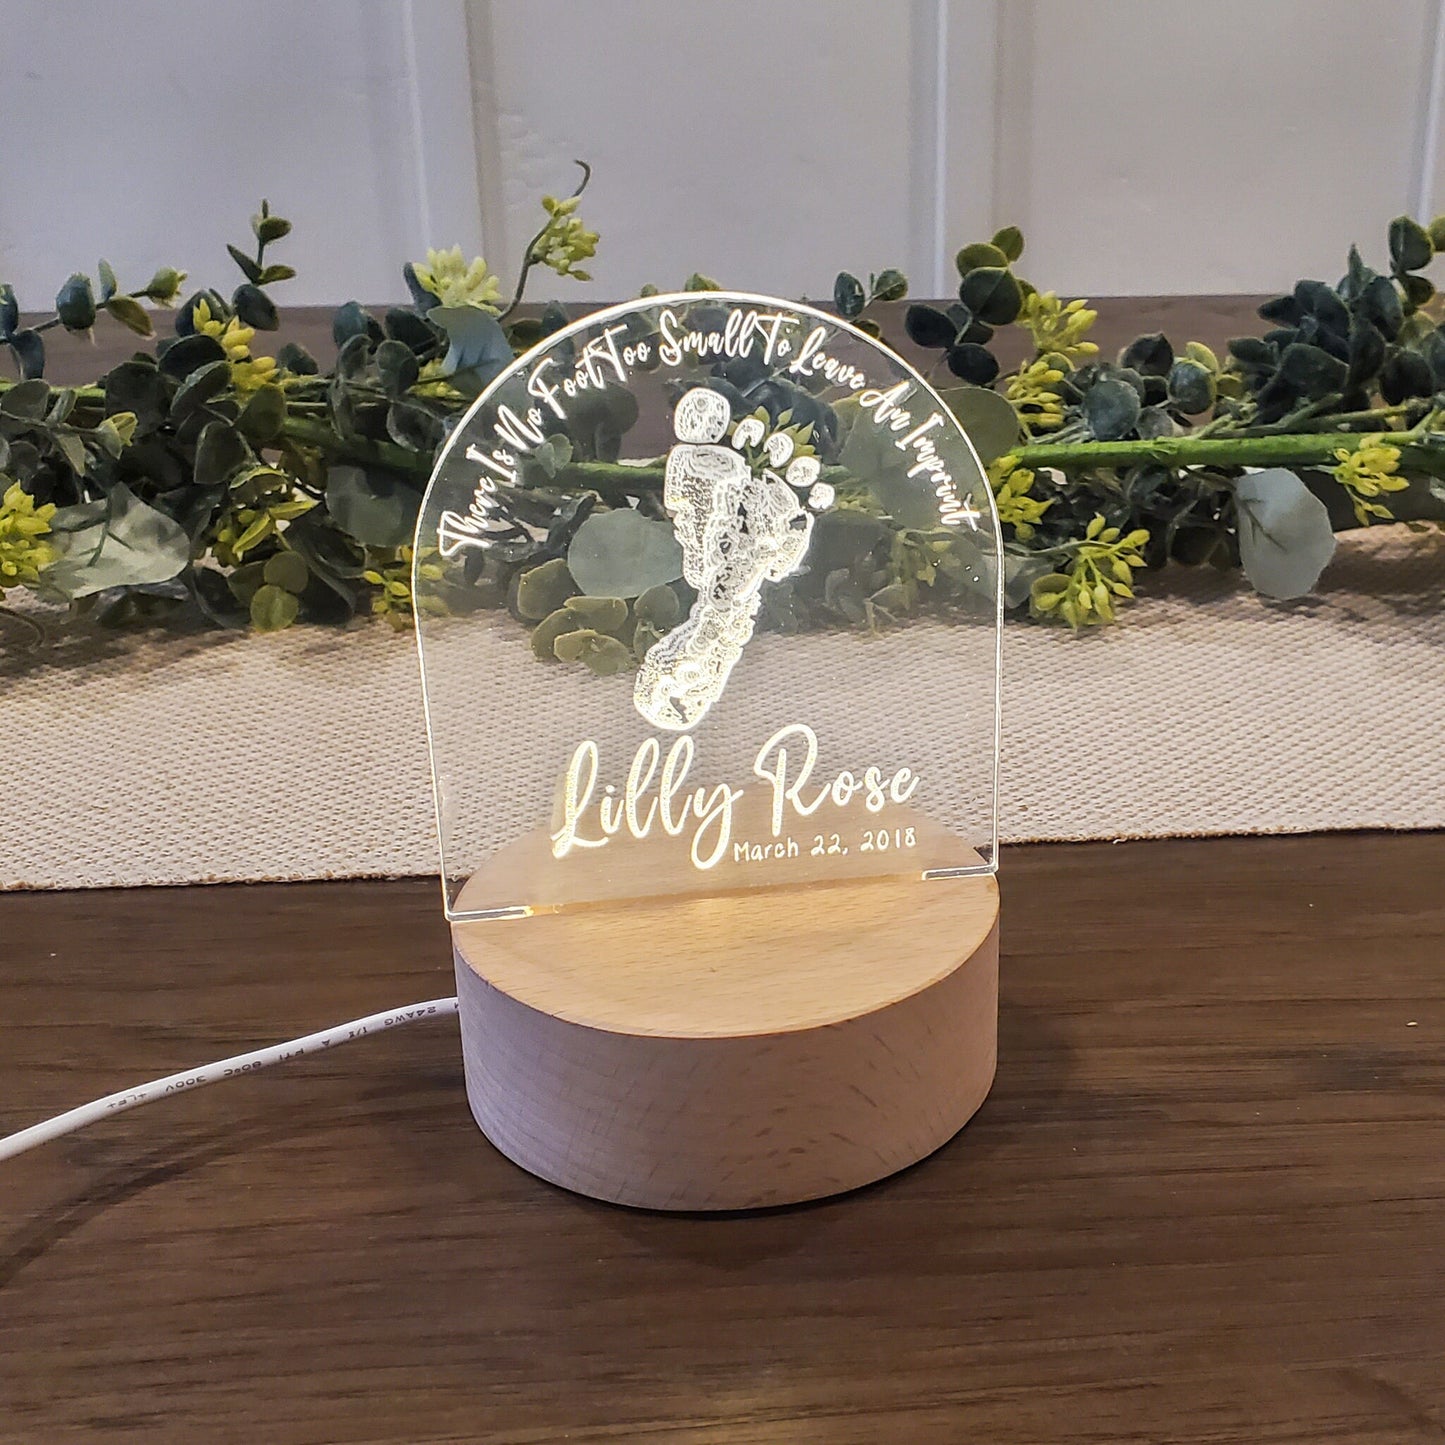 Personalized night light, nursery decor, personalized infant loss miscarriage gift